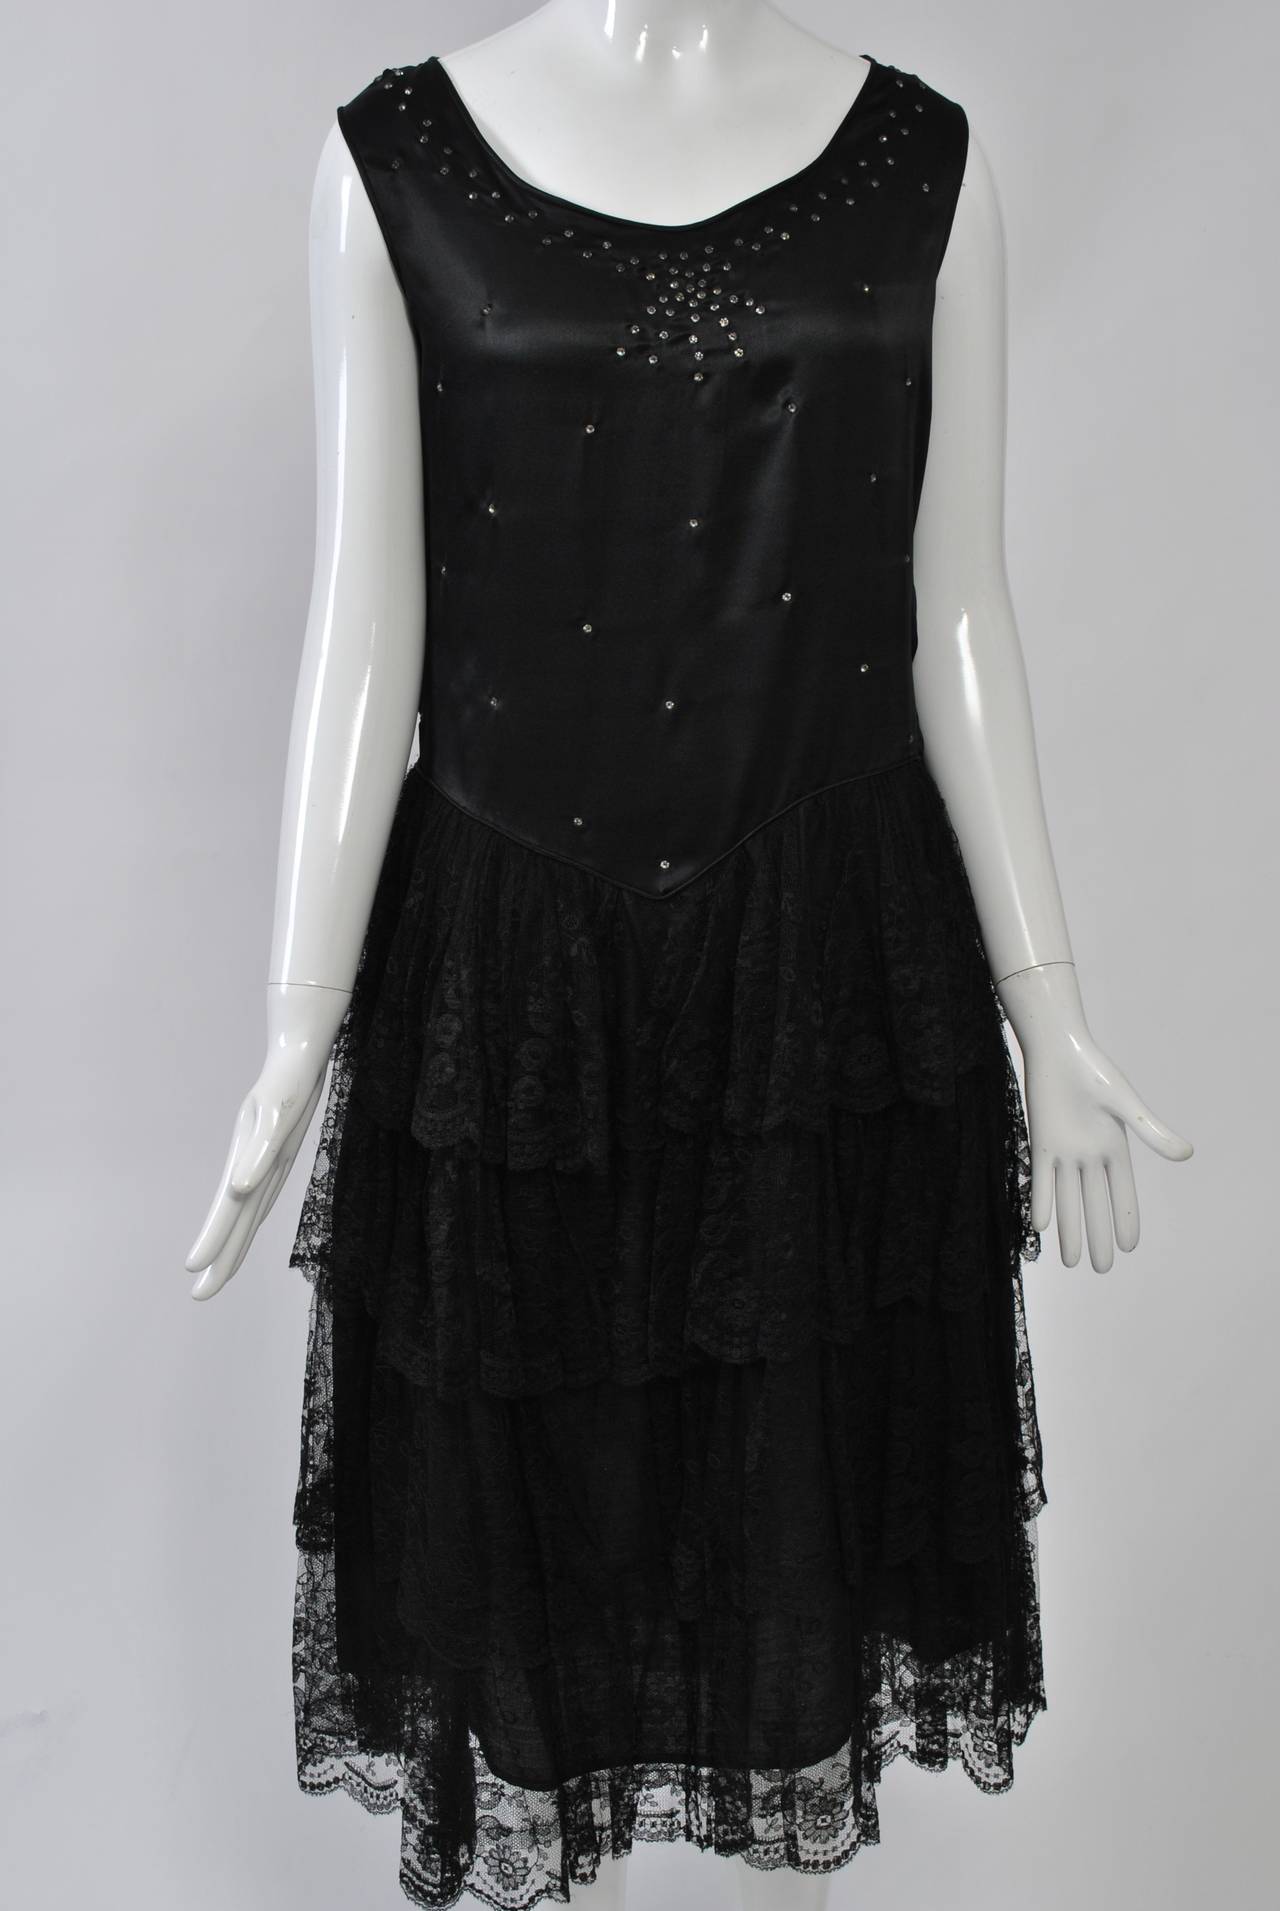 1930s Black Silk and Lace Dress In Excellent Condition For Sale In Alford, MA